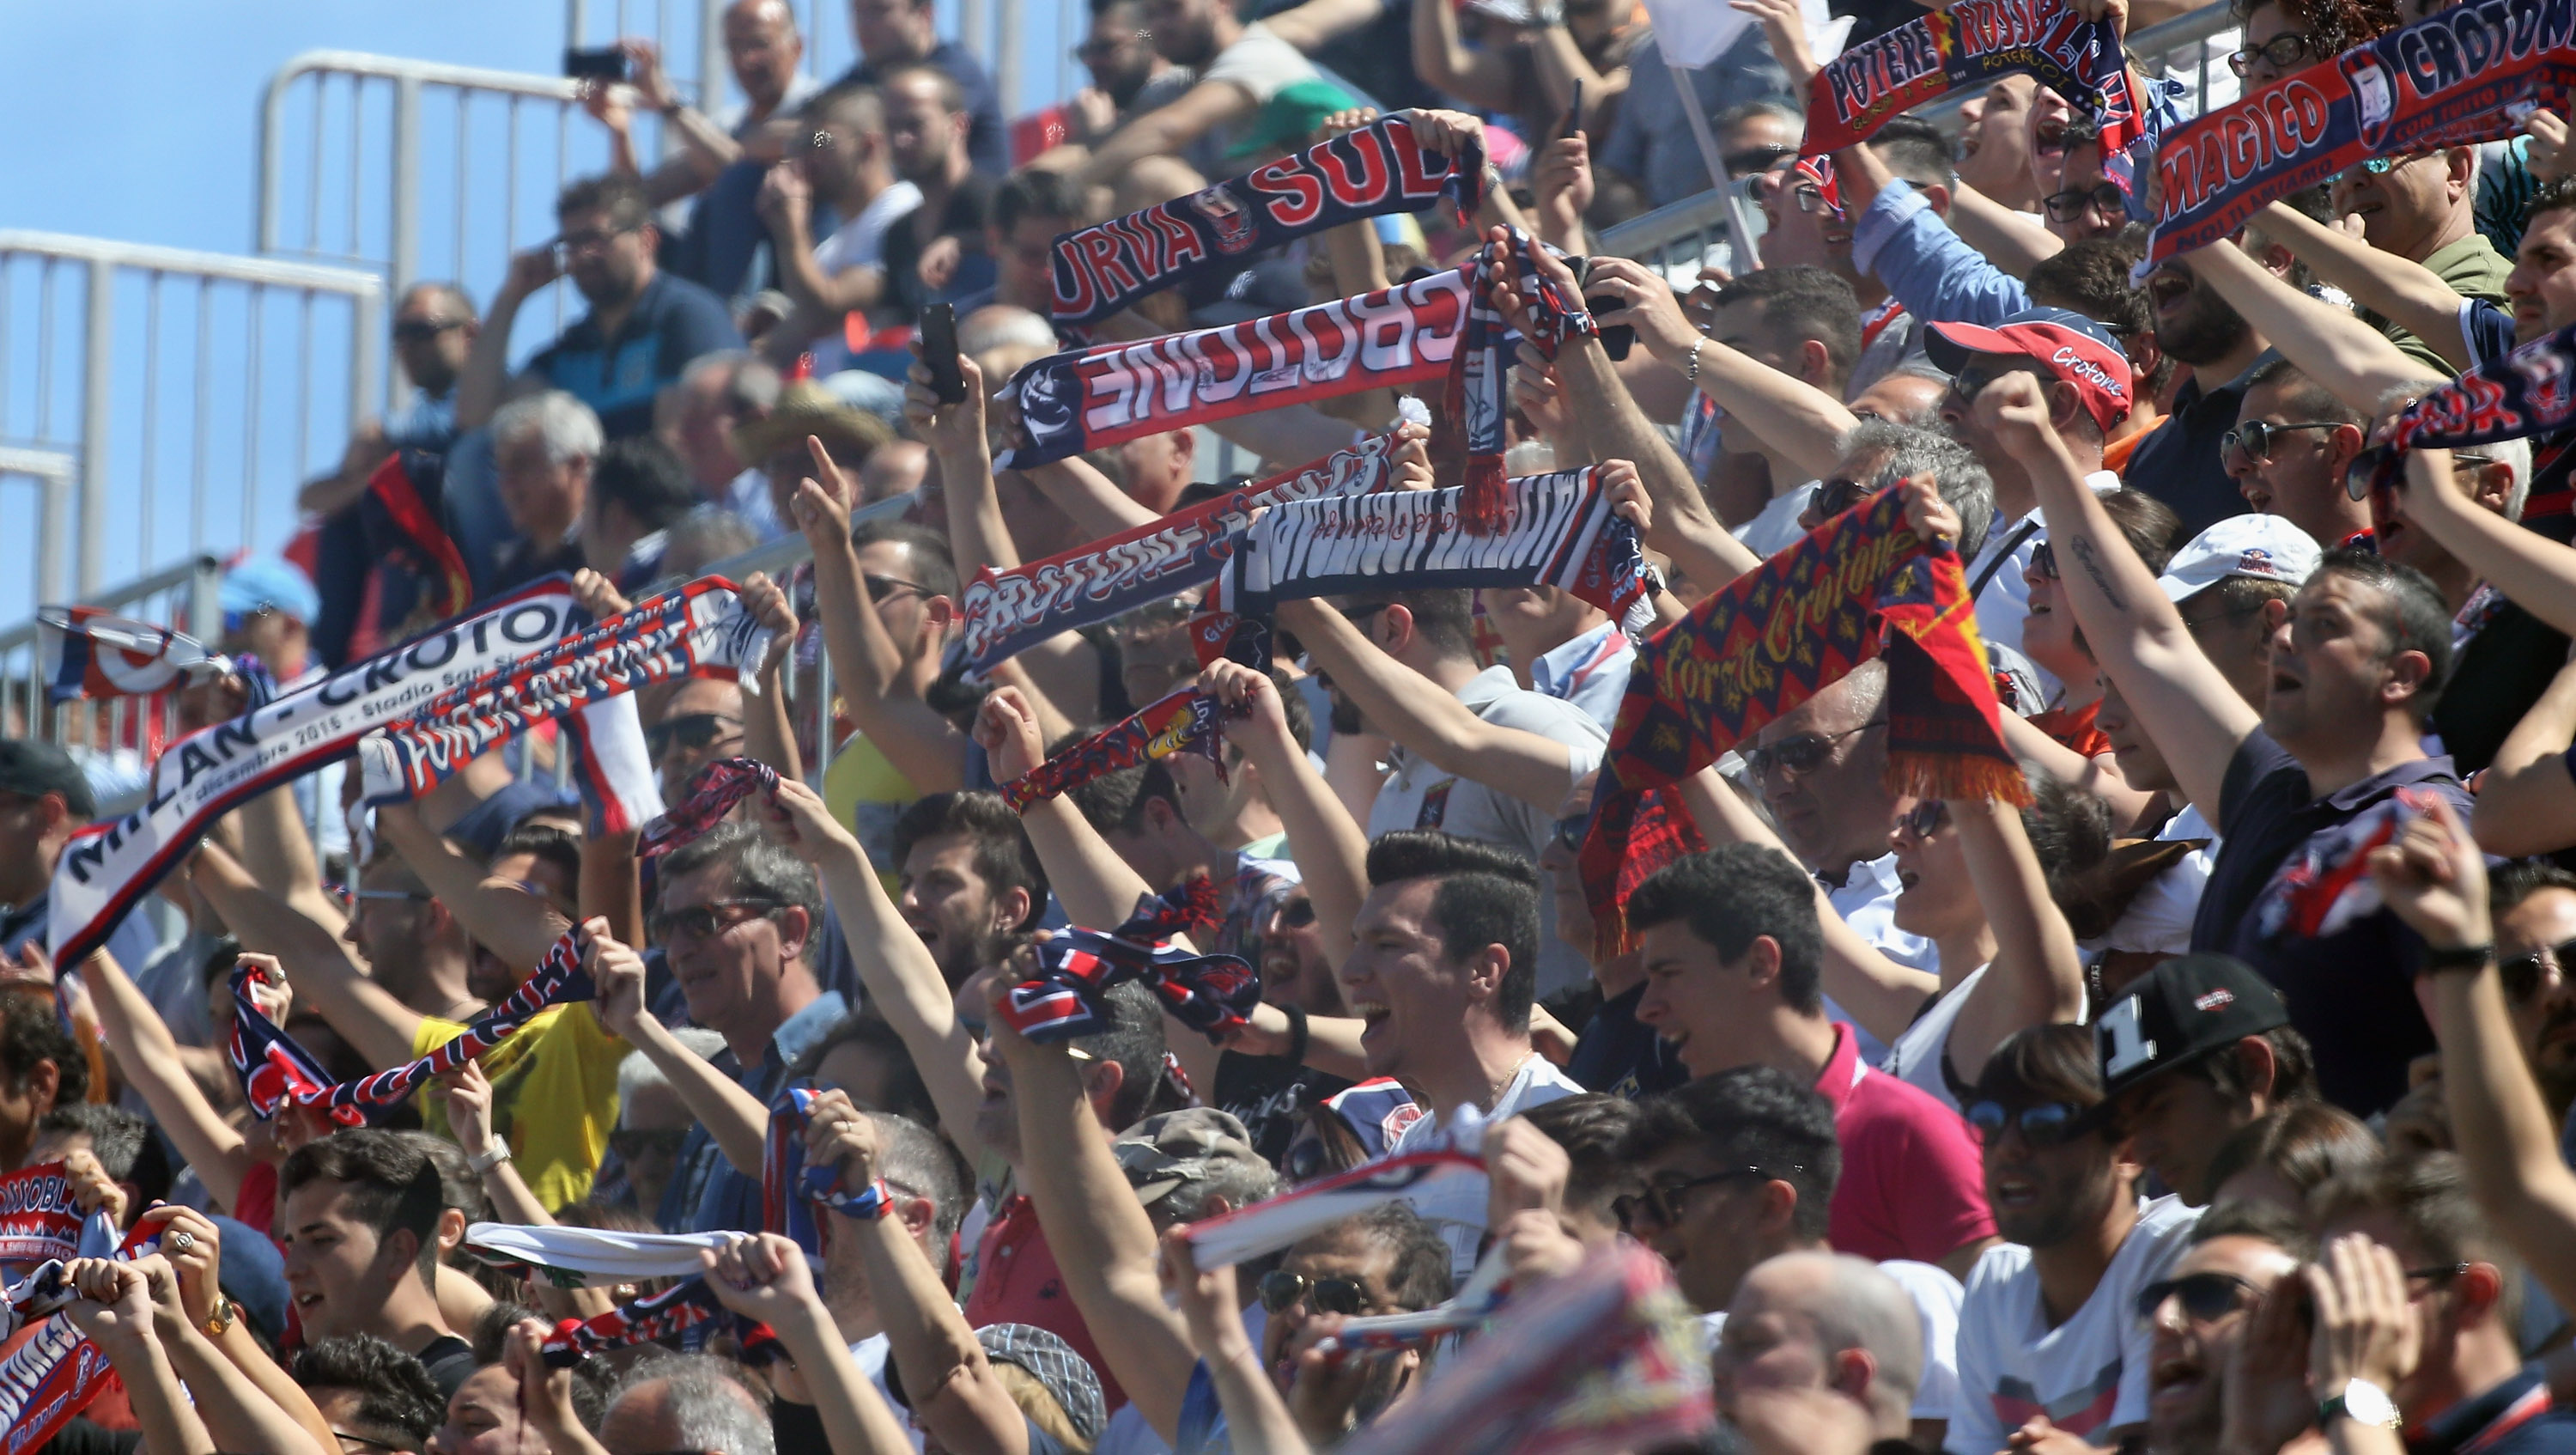 CROTONE, ITALY - MAY 14:  Fans of Crotone during the Serie A match between FC Crotone and Udinese Calcio at Stadio Comunale Ezio Scida on May 14, 2017 in Crotone, Italy.  (Photo by Maurizio Lagana/Getty Images)